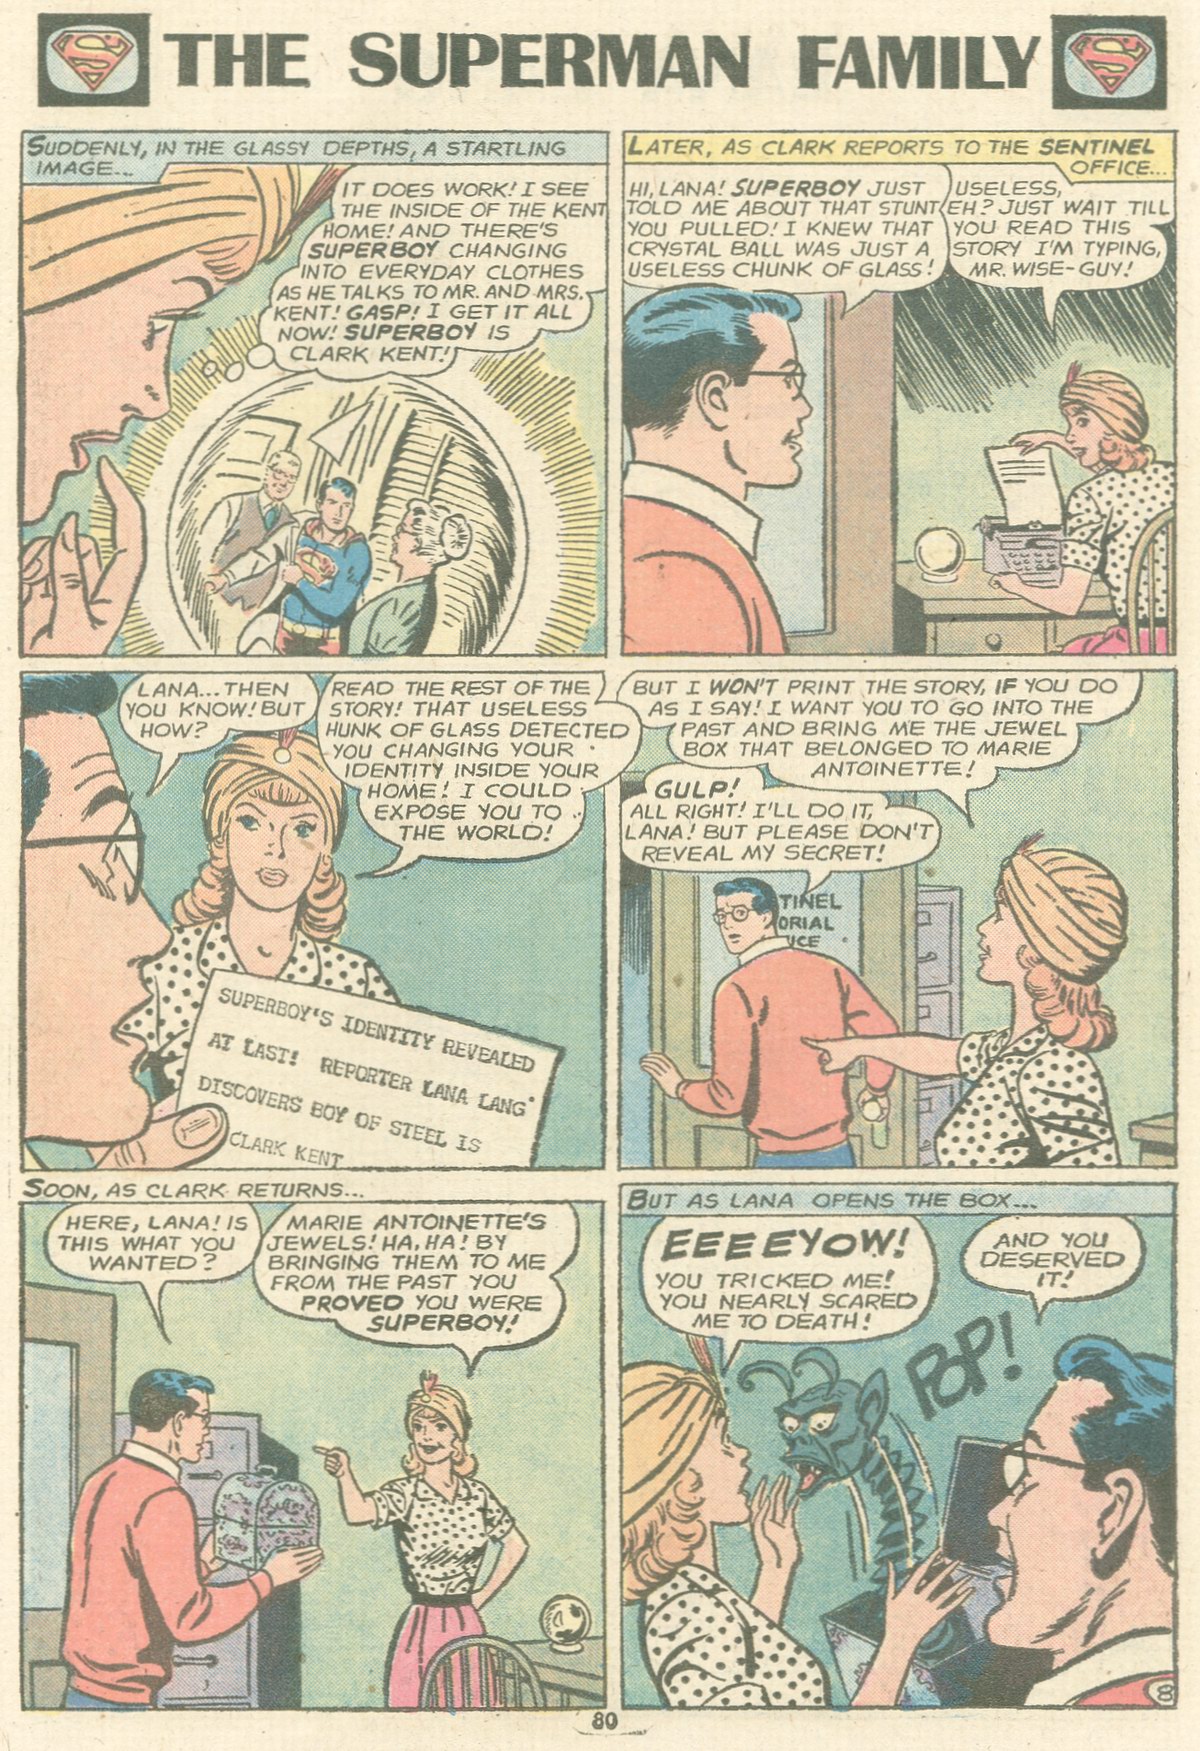 The Superman Family 168 Page 80